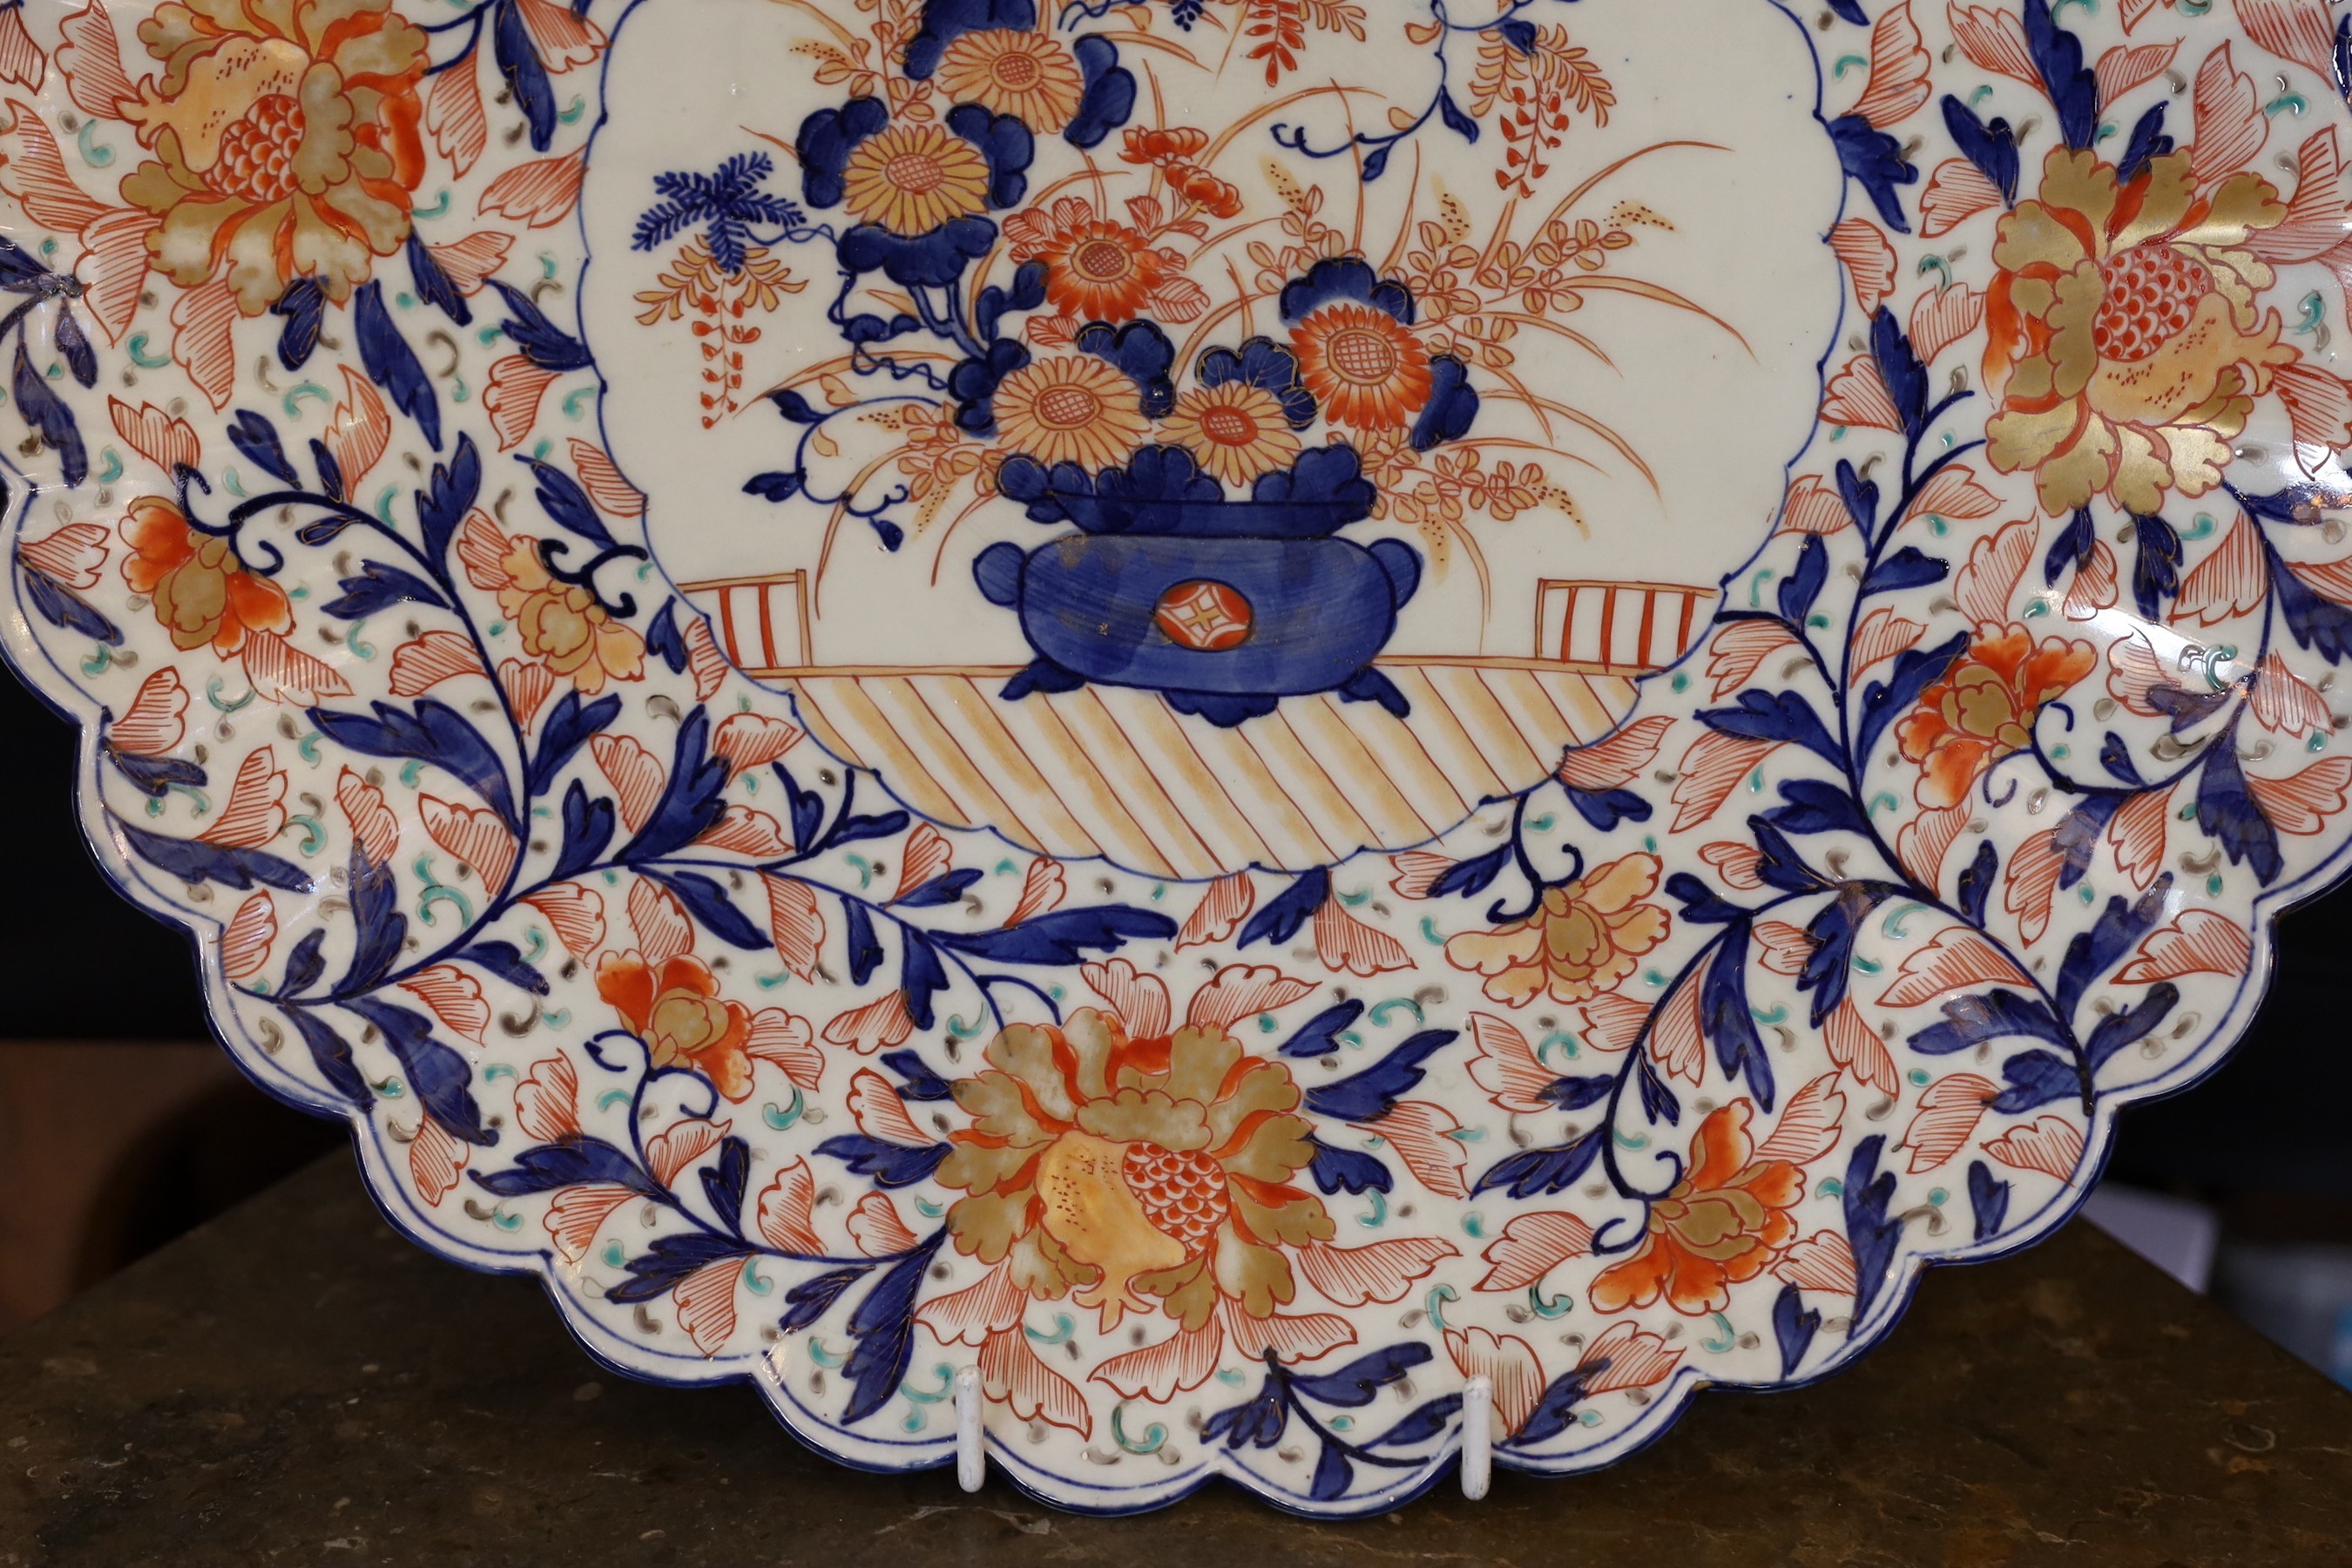 An Imari charger decorated with a central panel of flowers in a vase within floral borders, diameter 47 cm